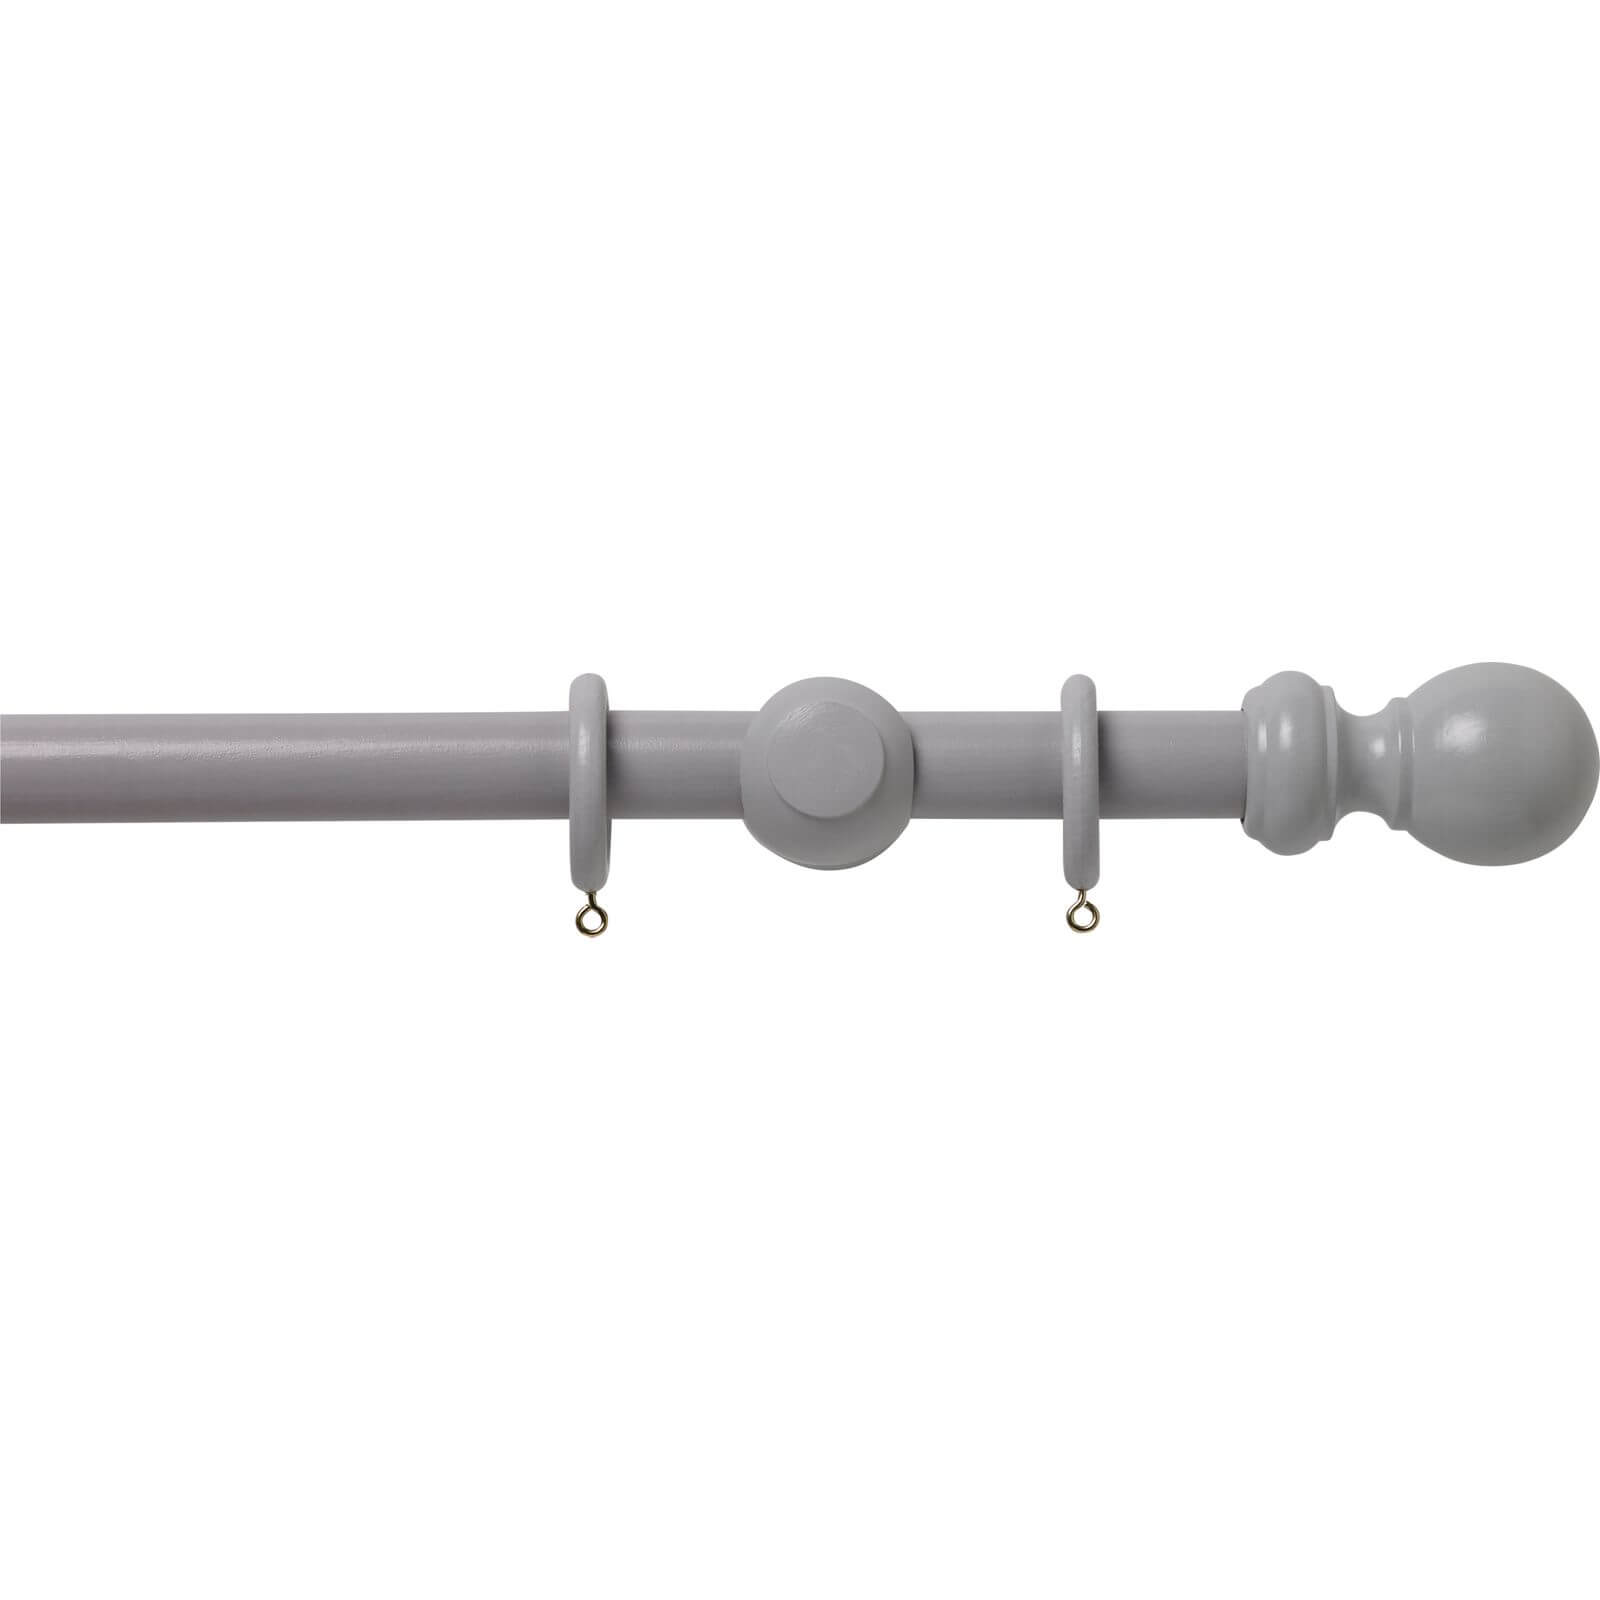 Grey Wood 28mm Curtain Pole with Ball Finials - 1.8m